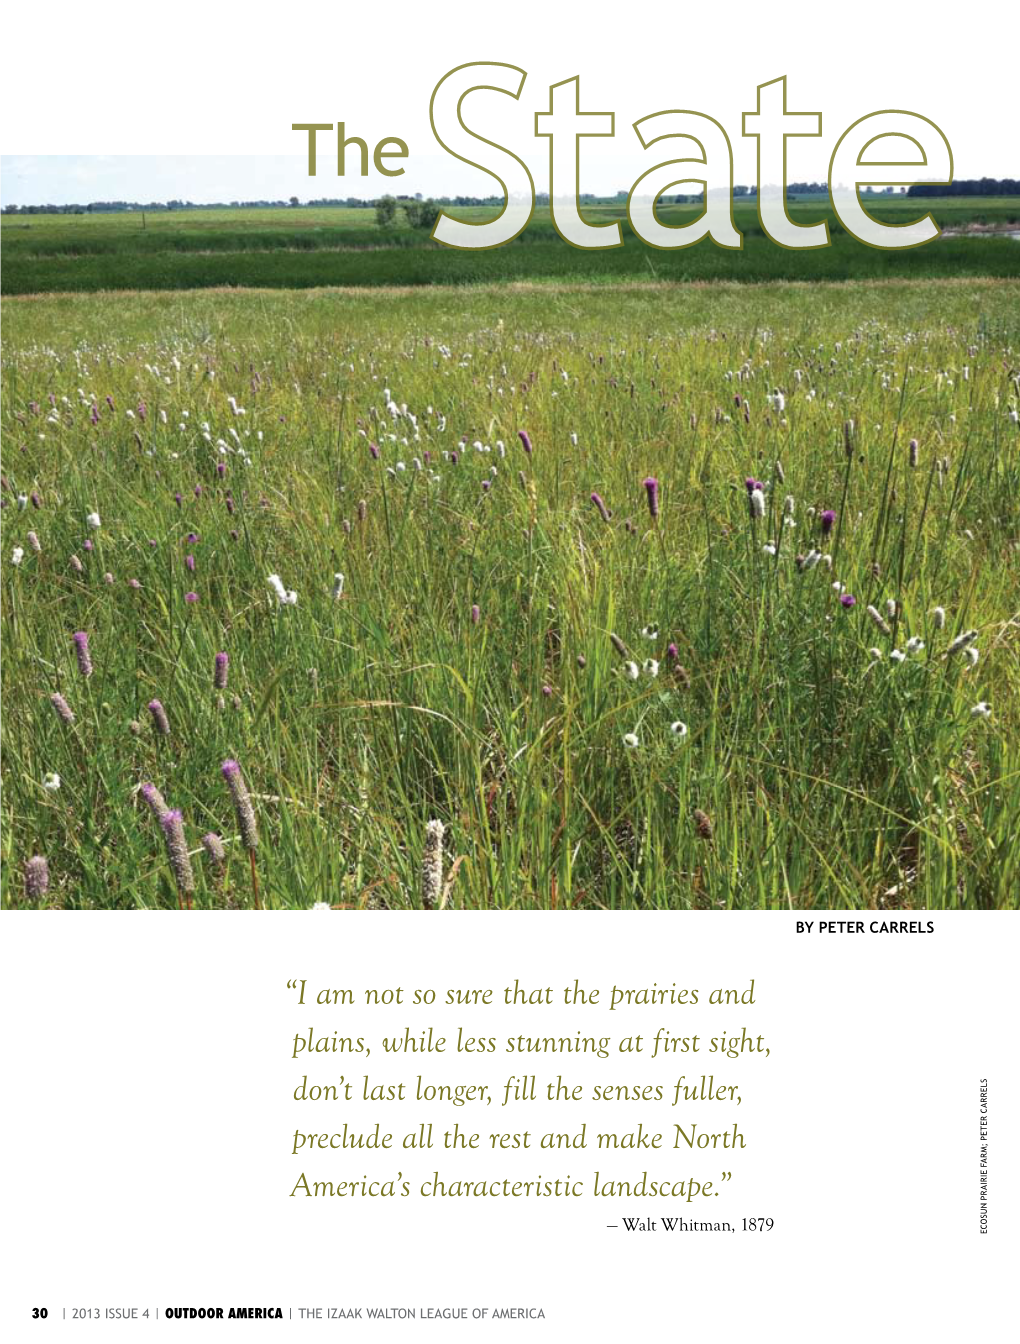 The State and Fate of Prairie